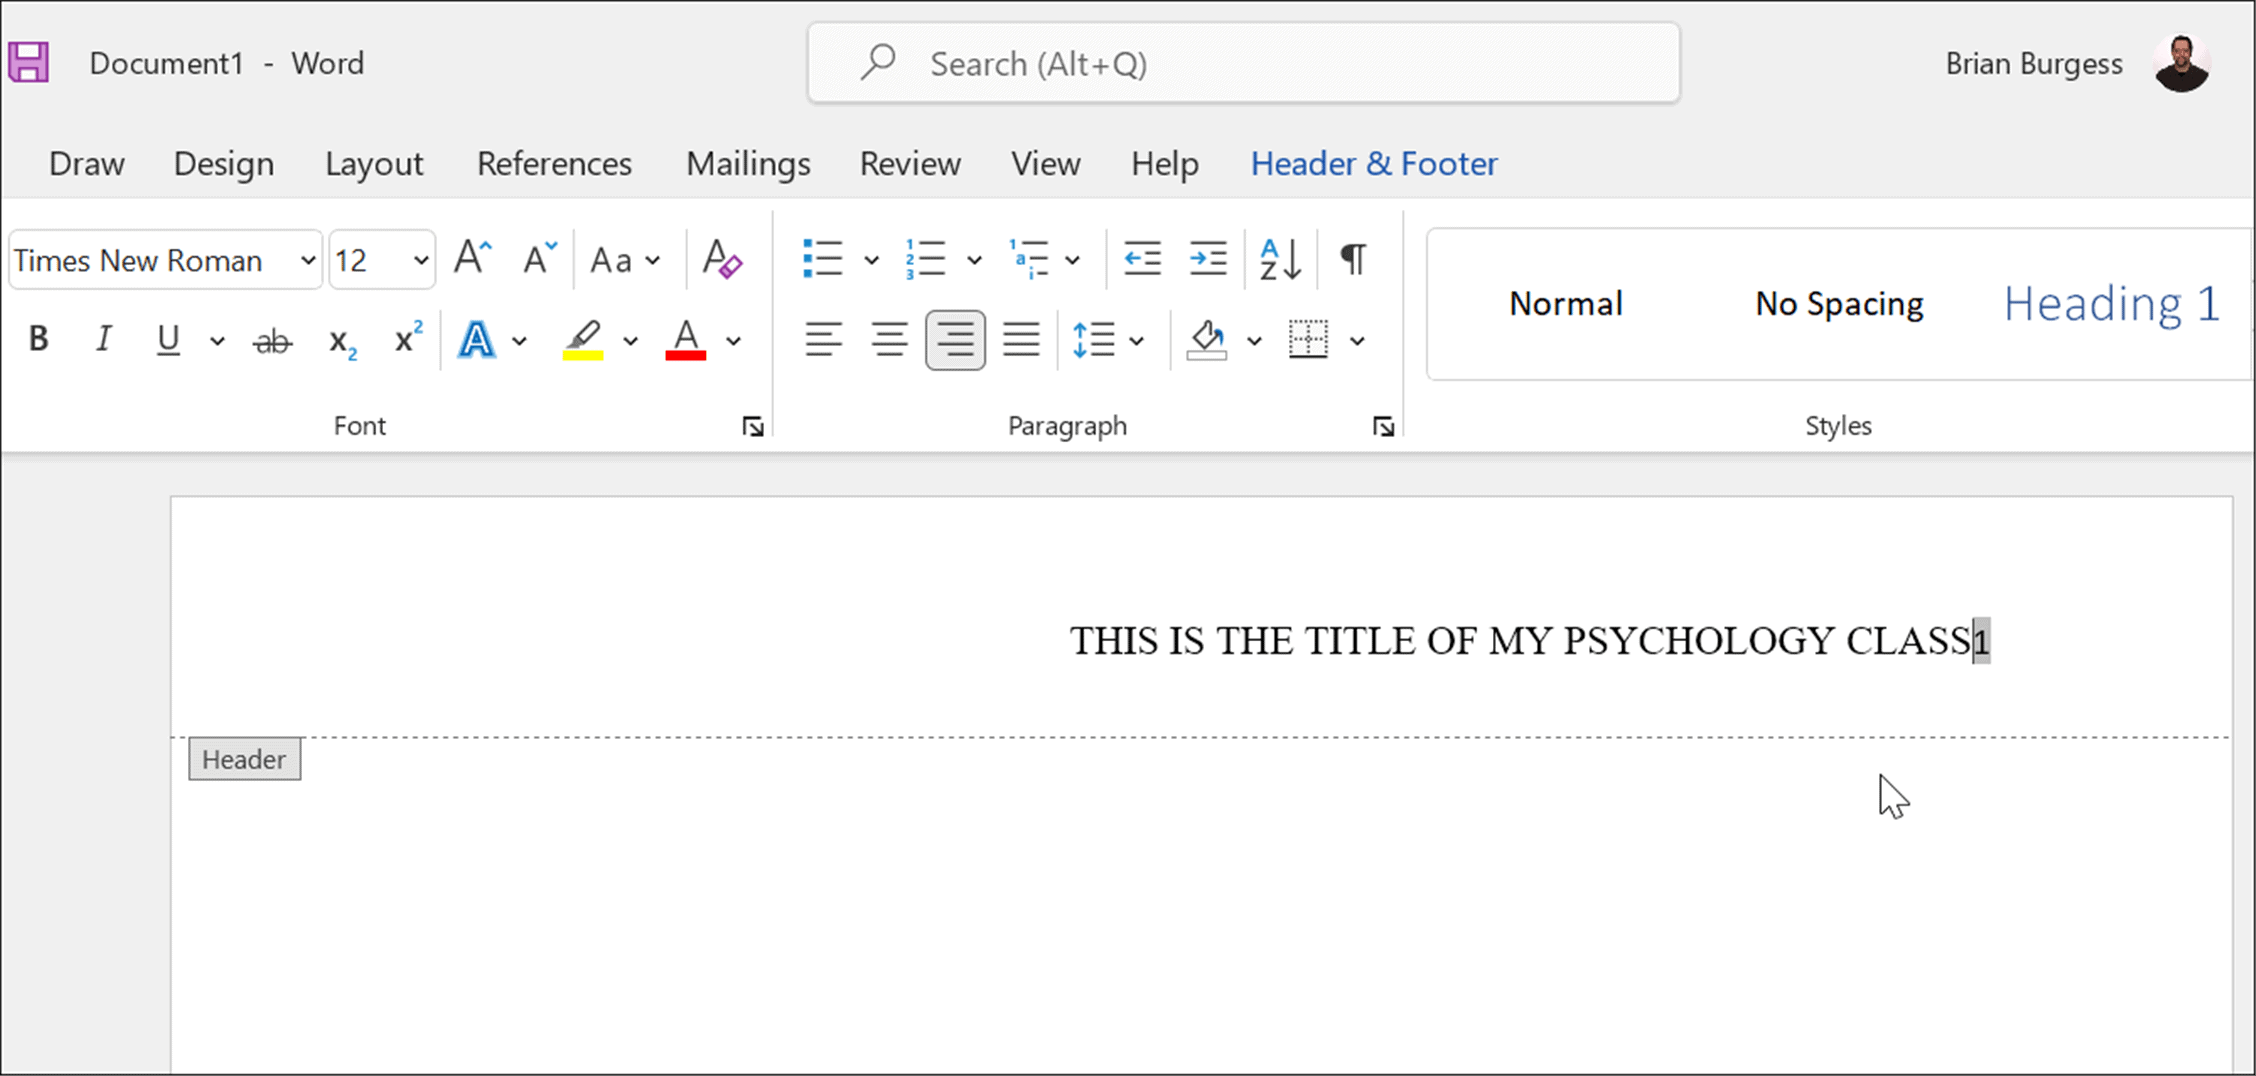 TITLE OF PAPER